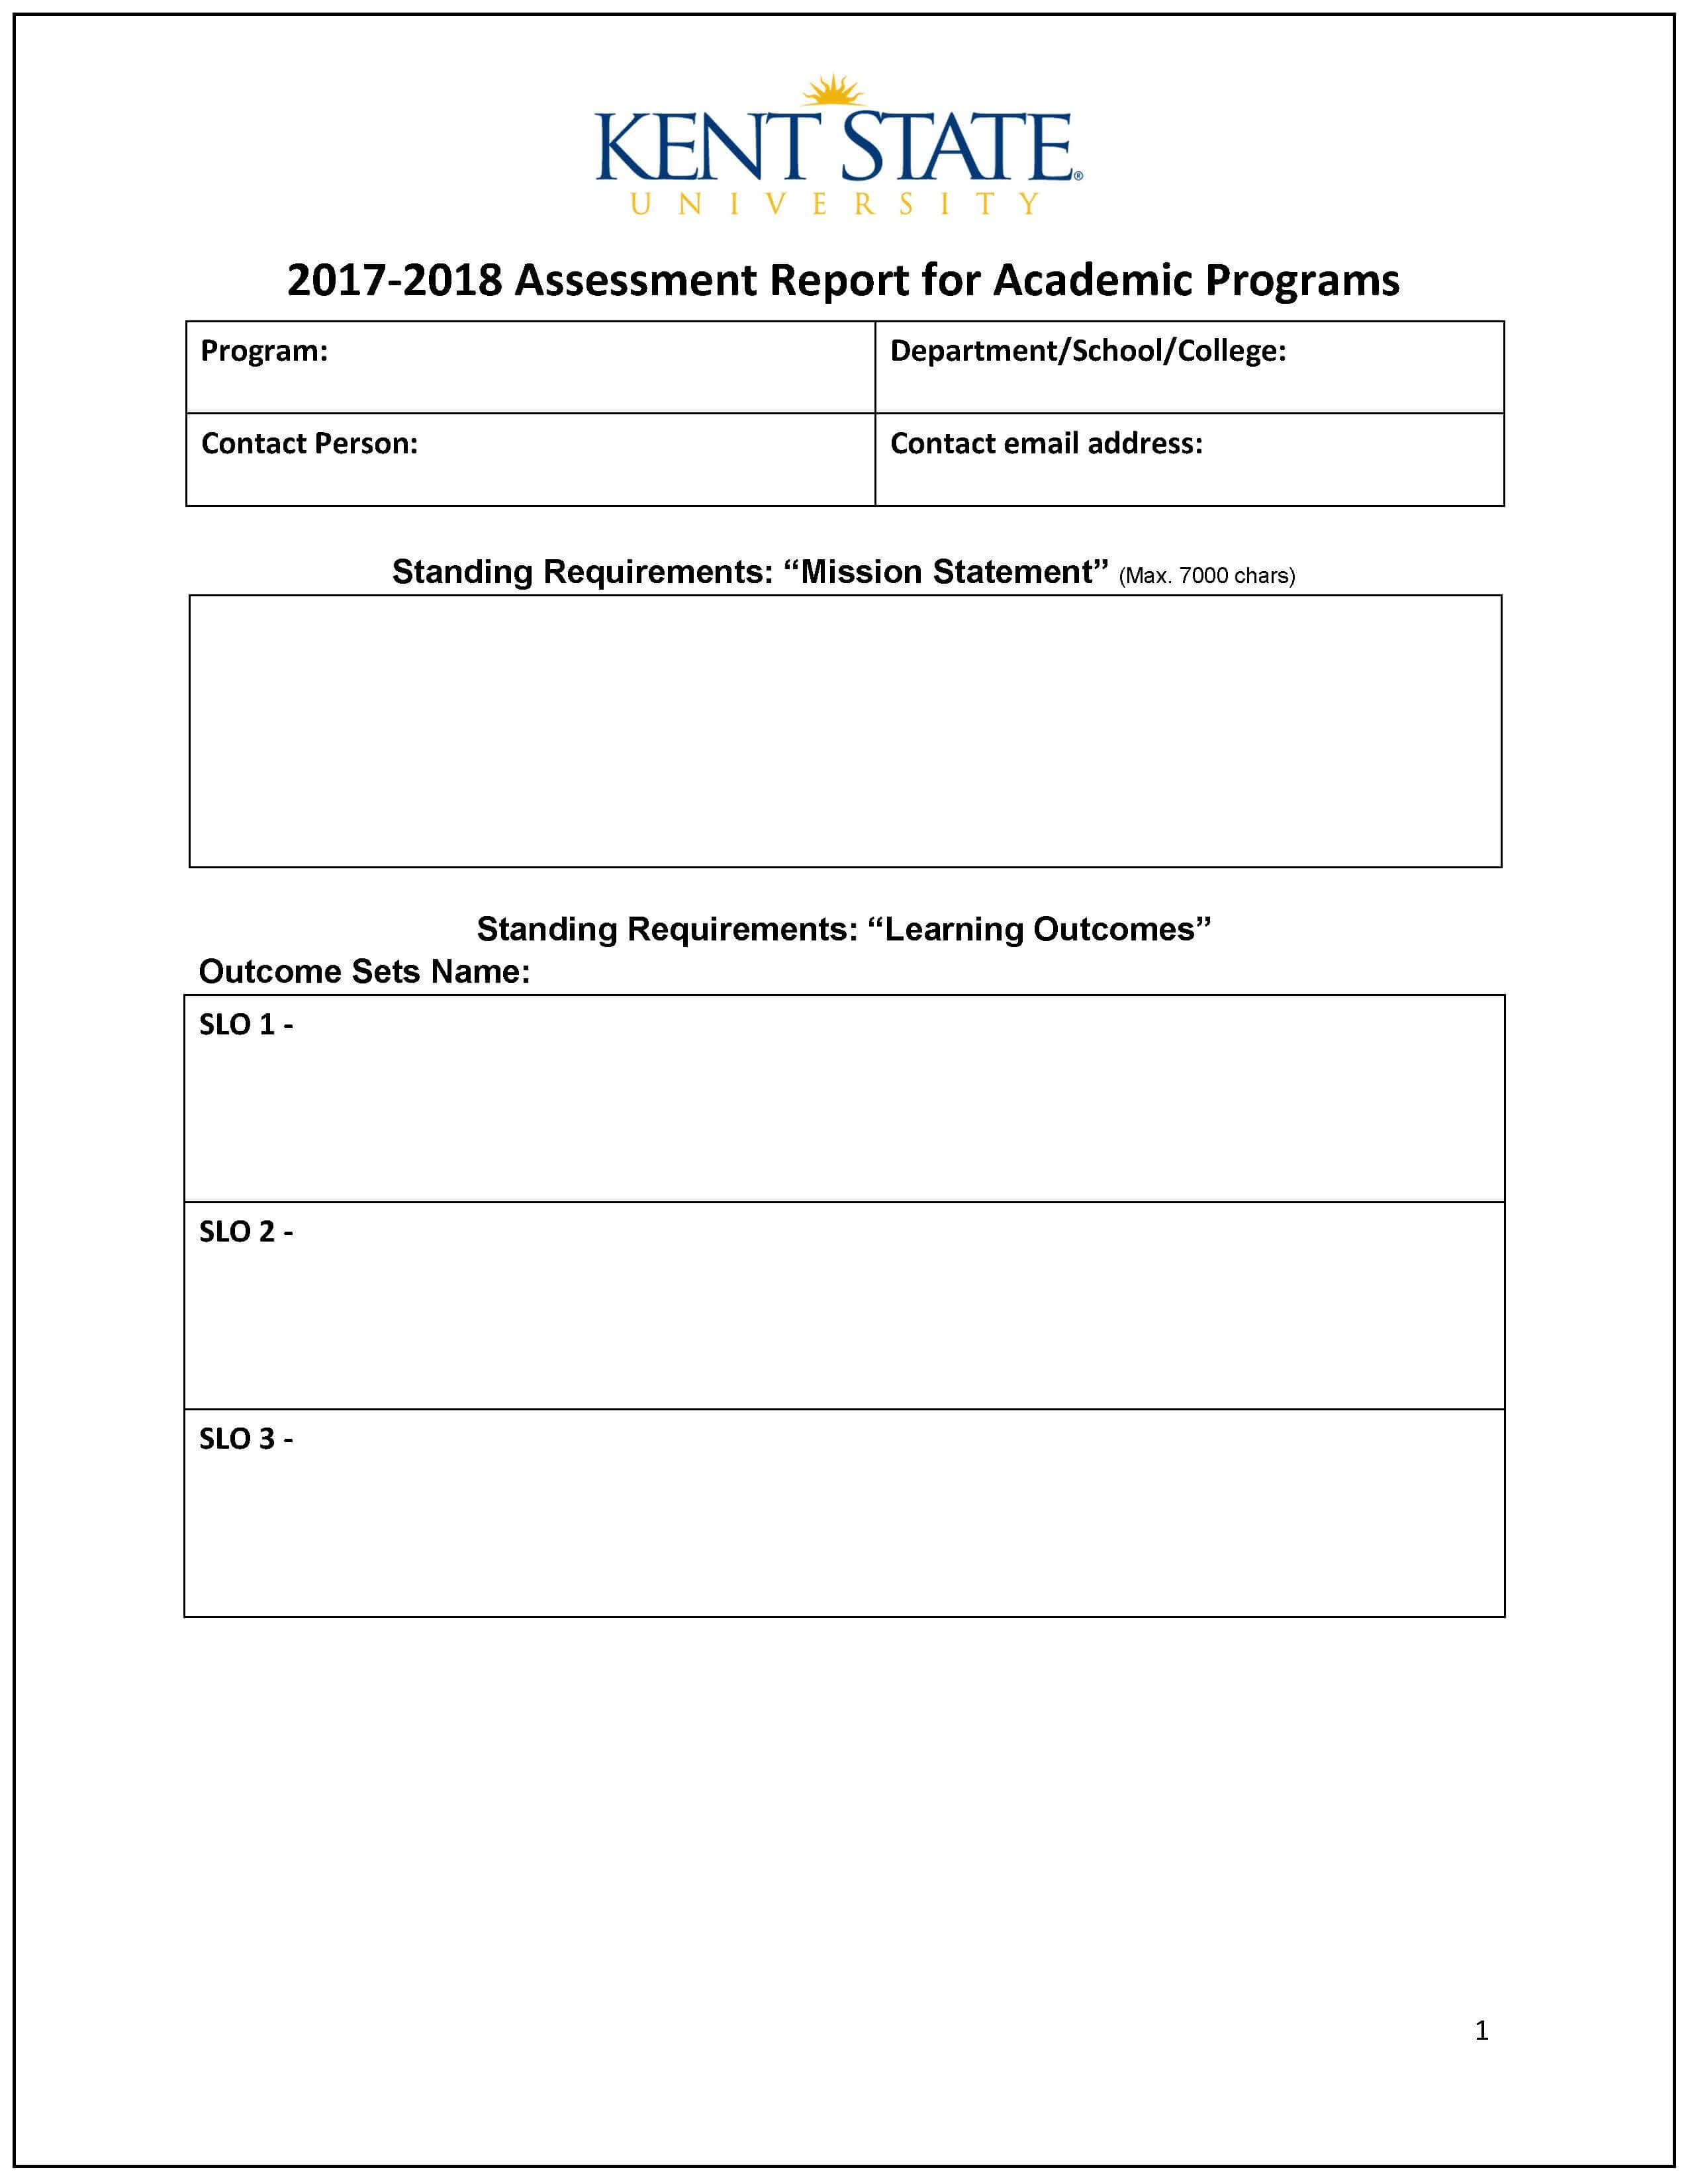 Assessment Report – Word Template | Accreditation Intended For State Report Template